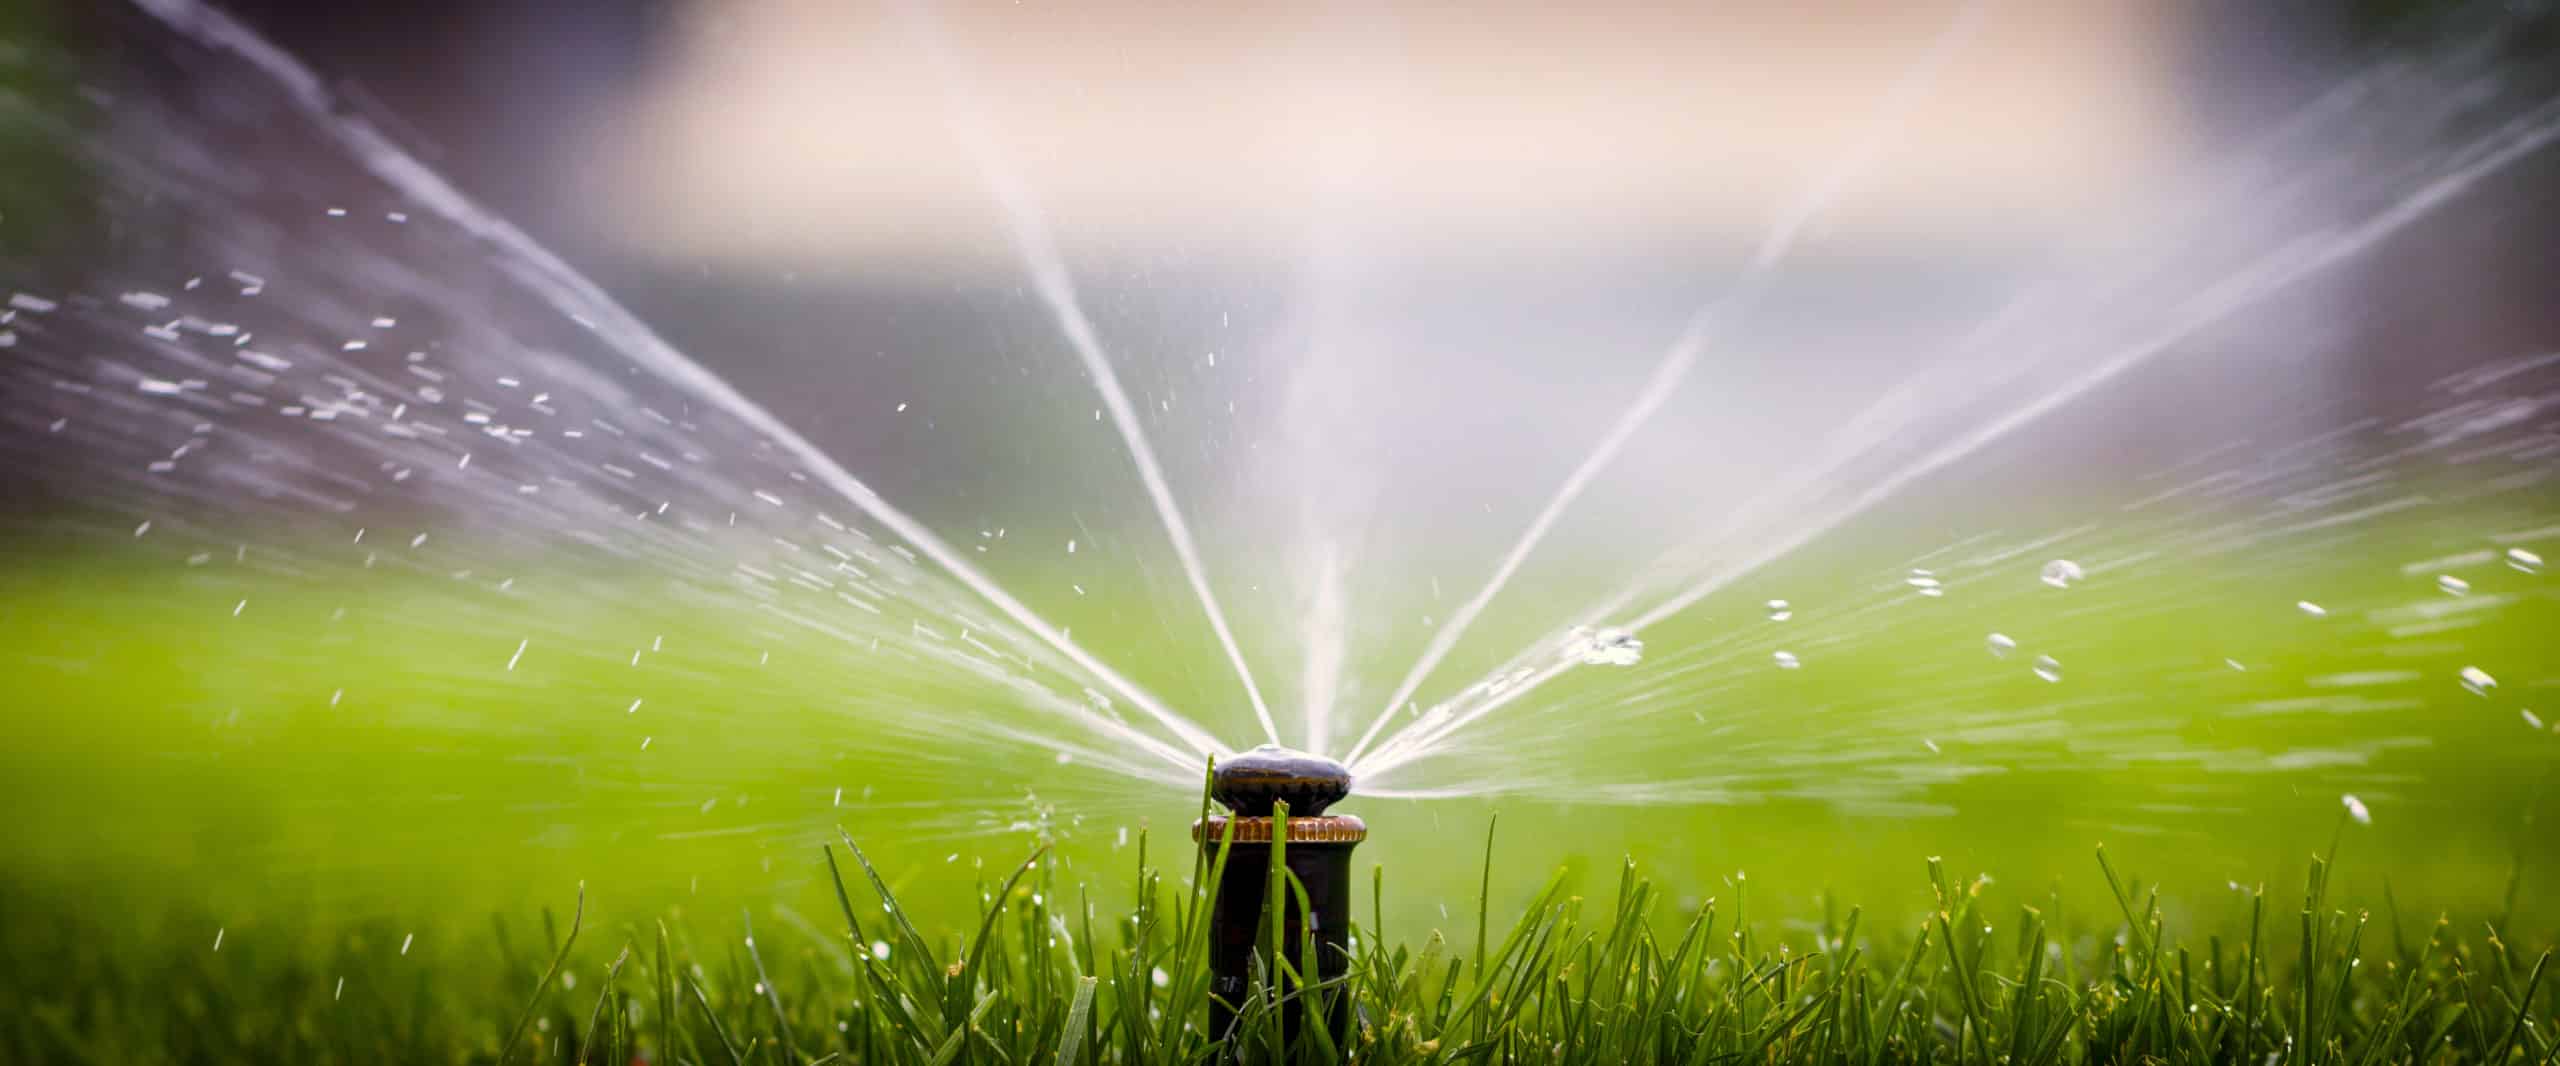 Sprinklers can help with watering and overall lawn care.